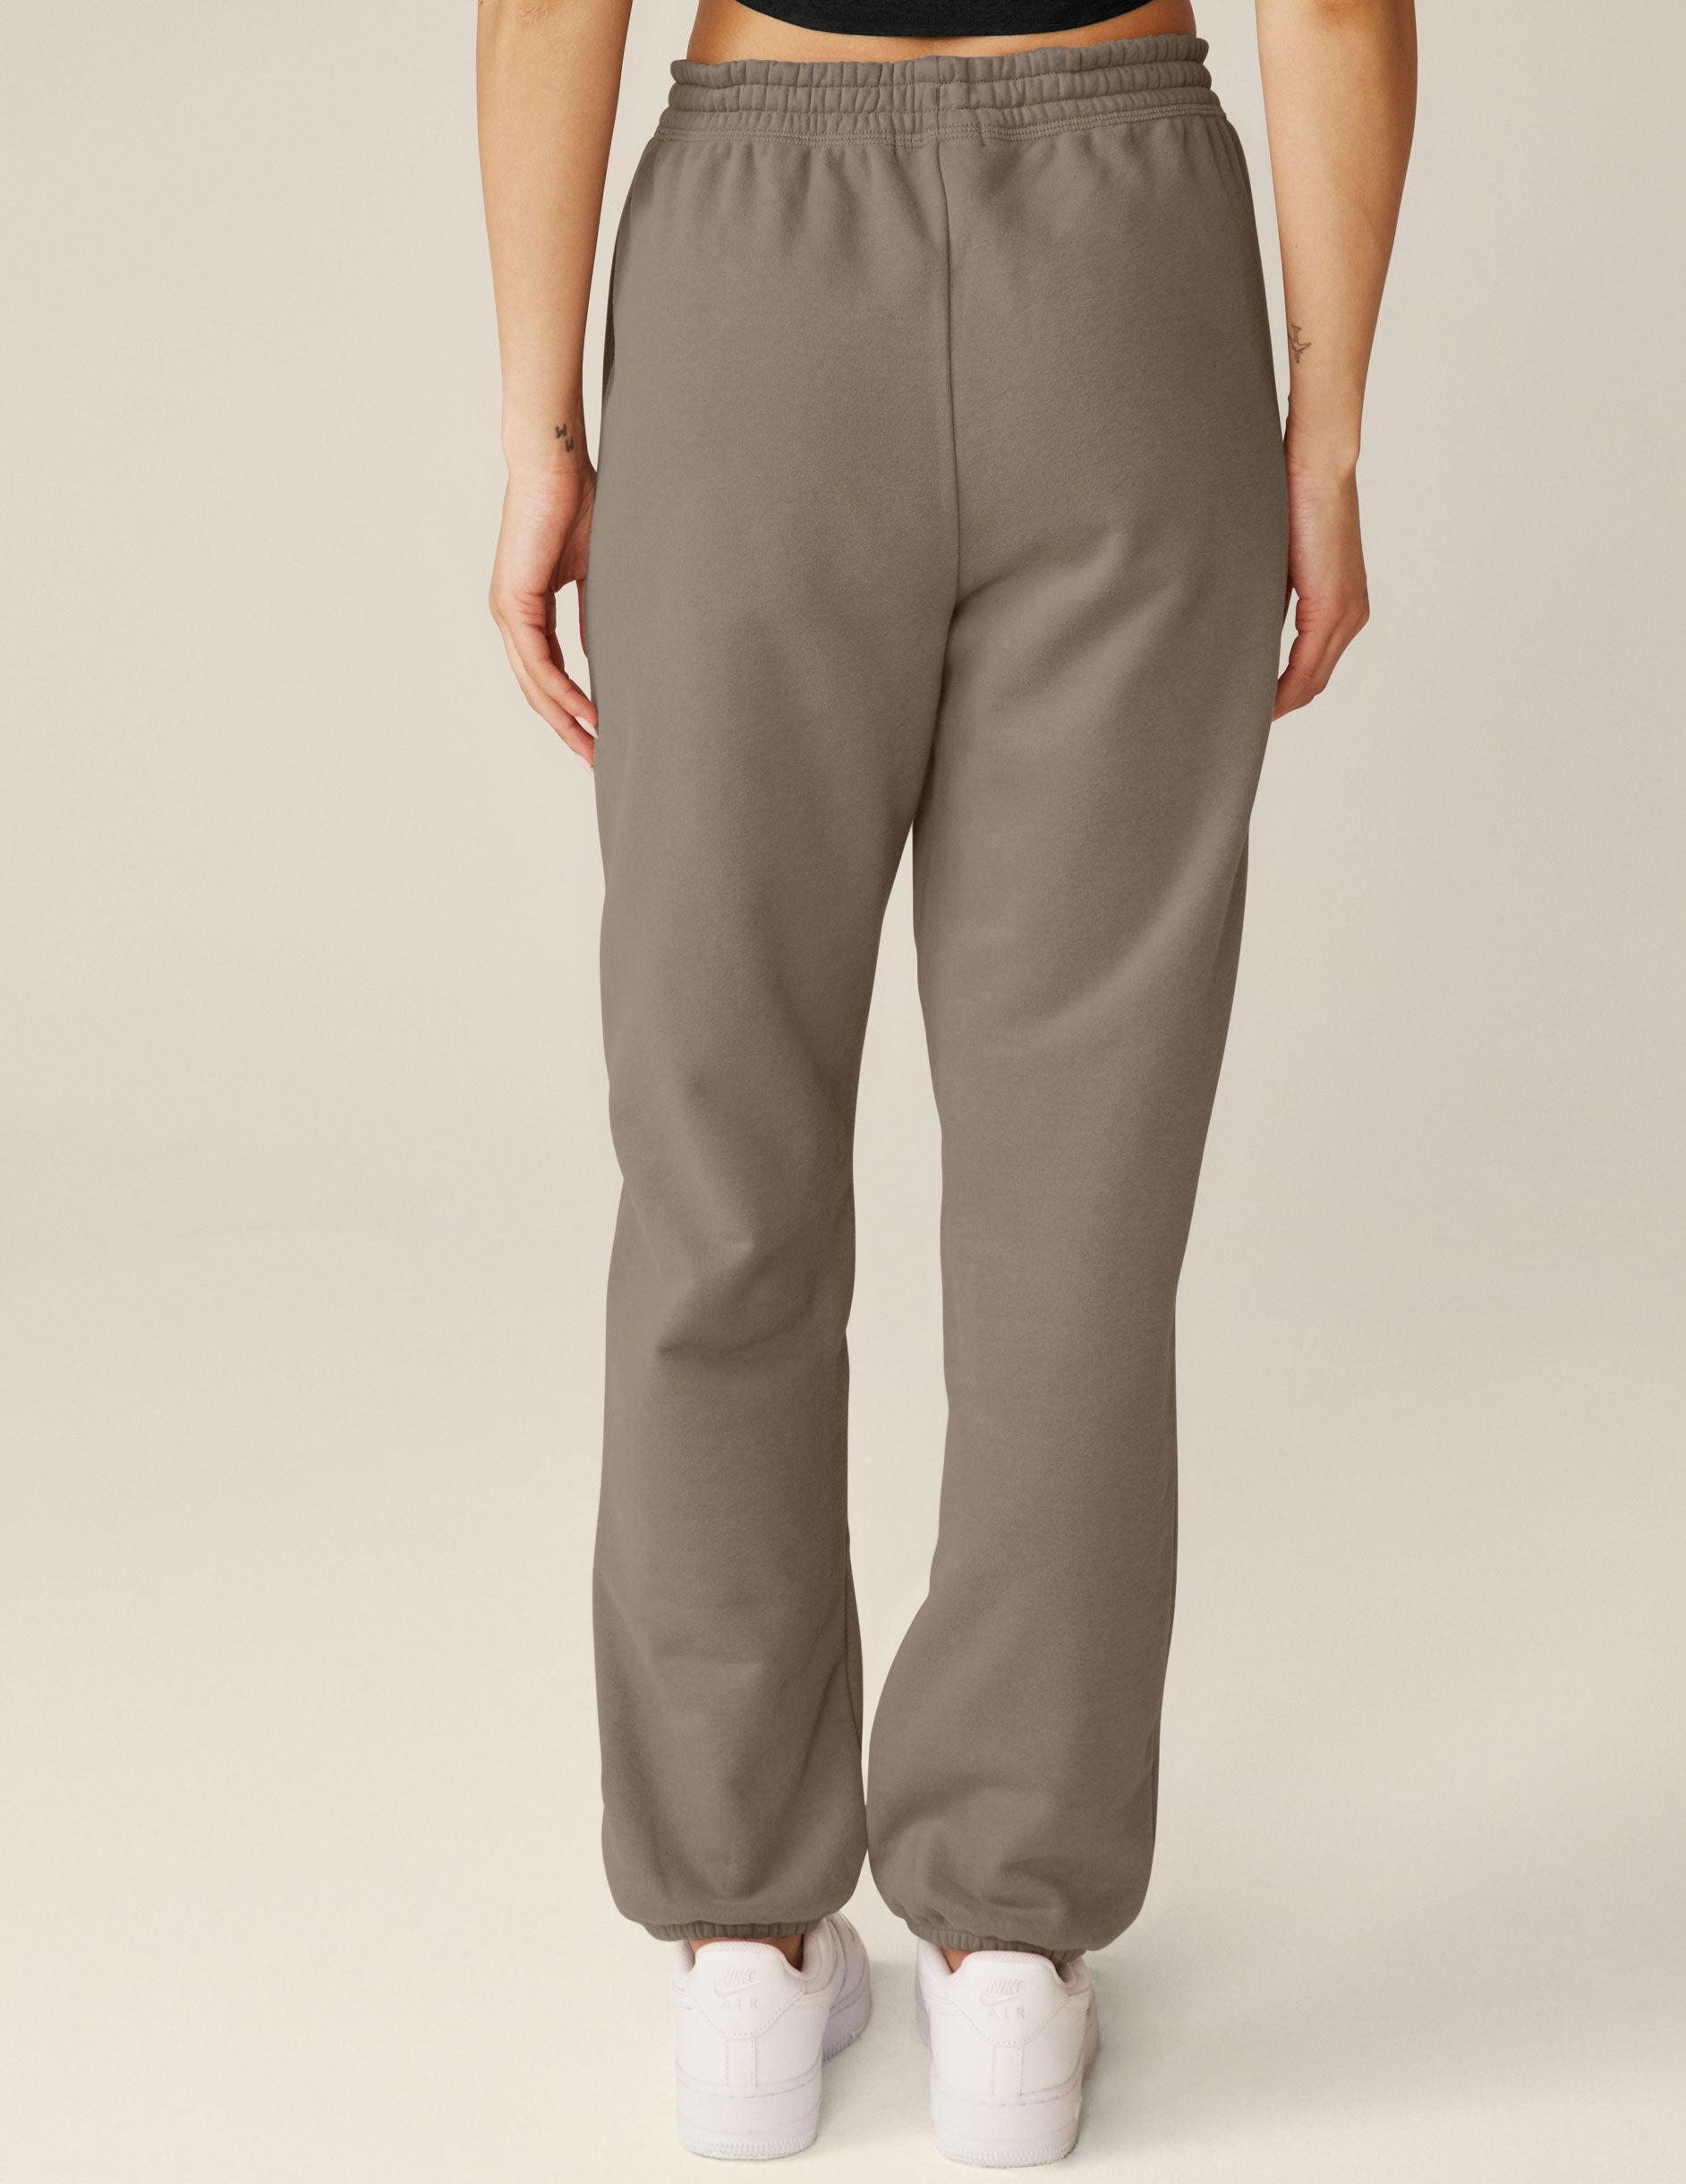 brown jogger pants with a drawstring on internal waistband